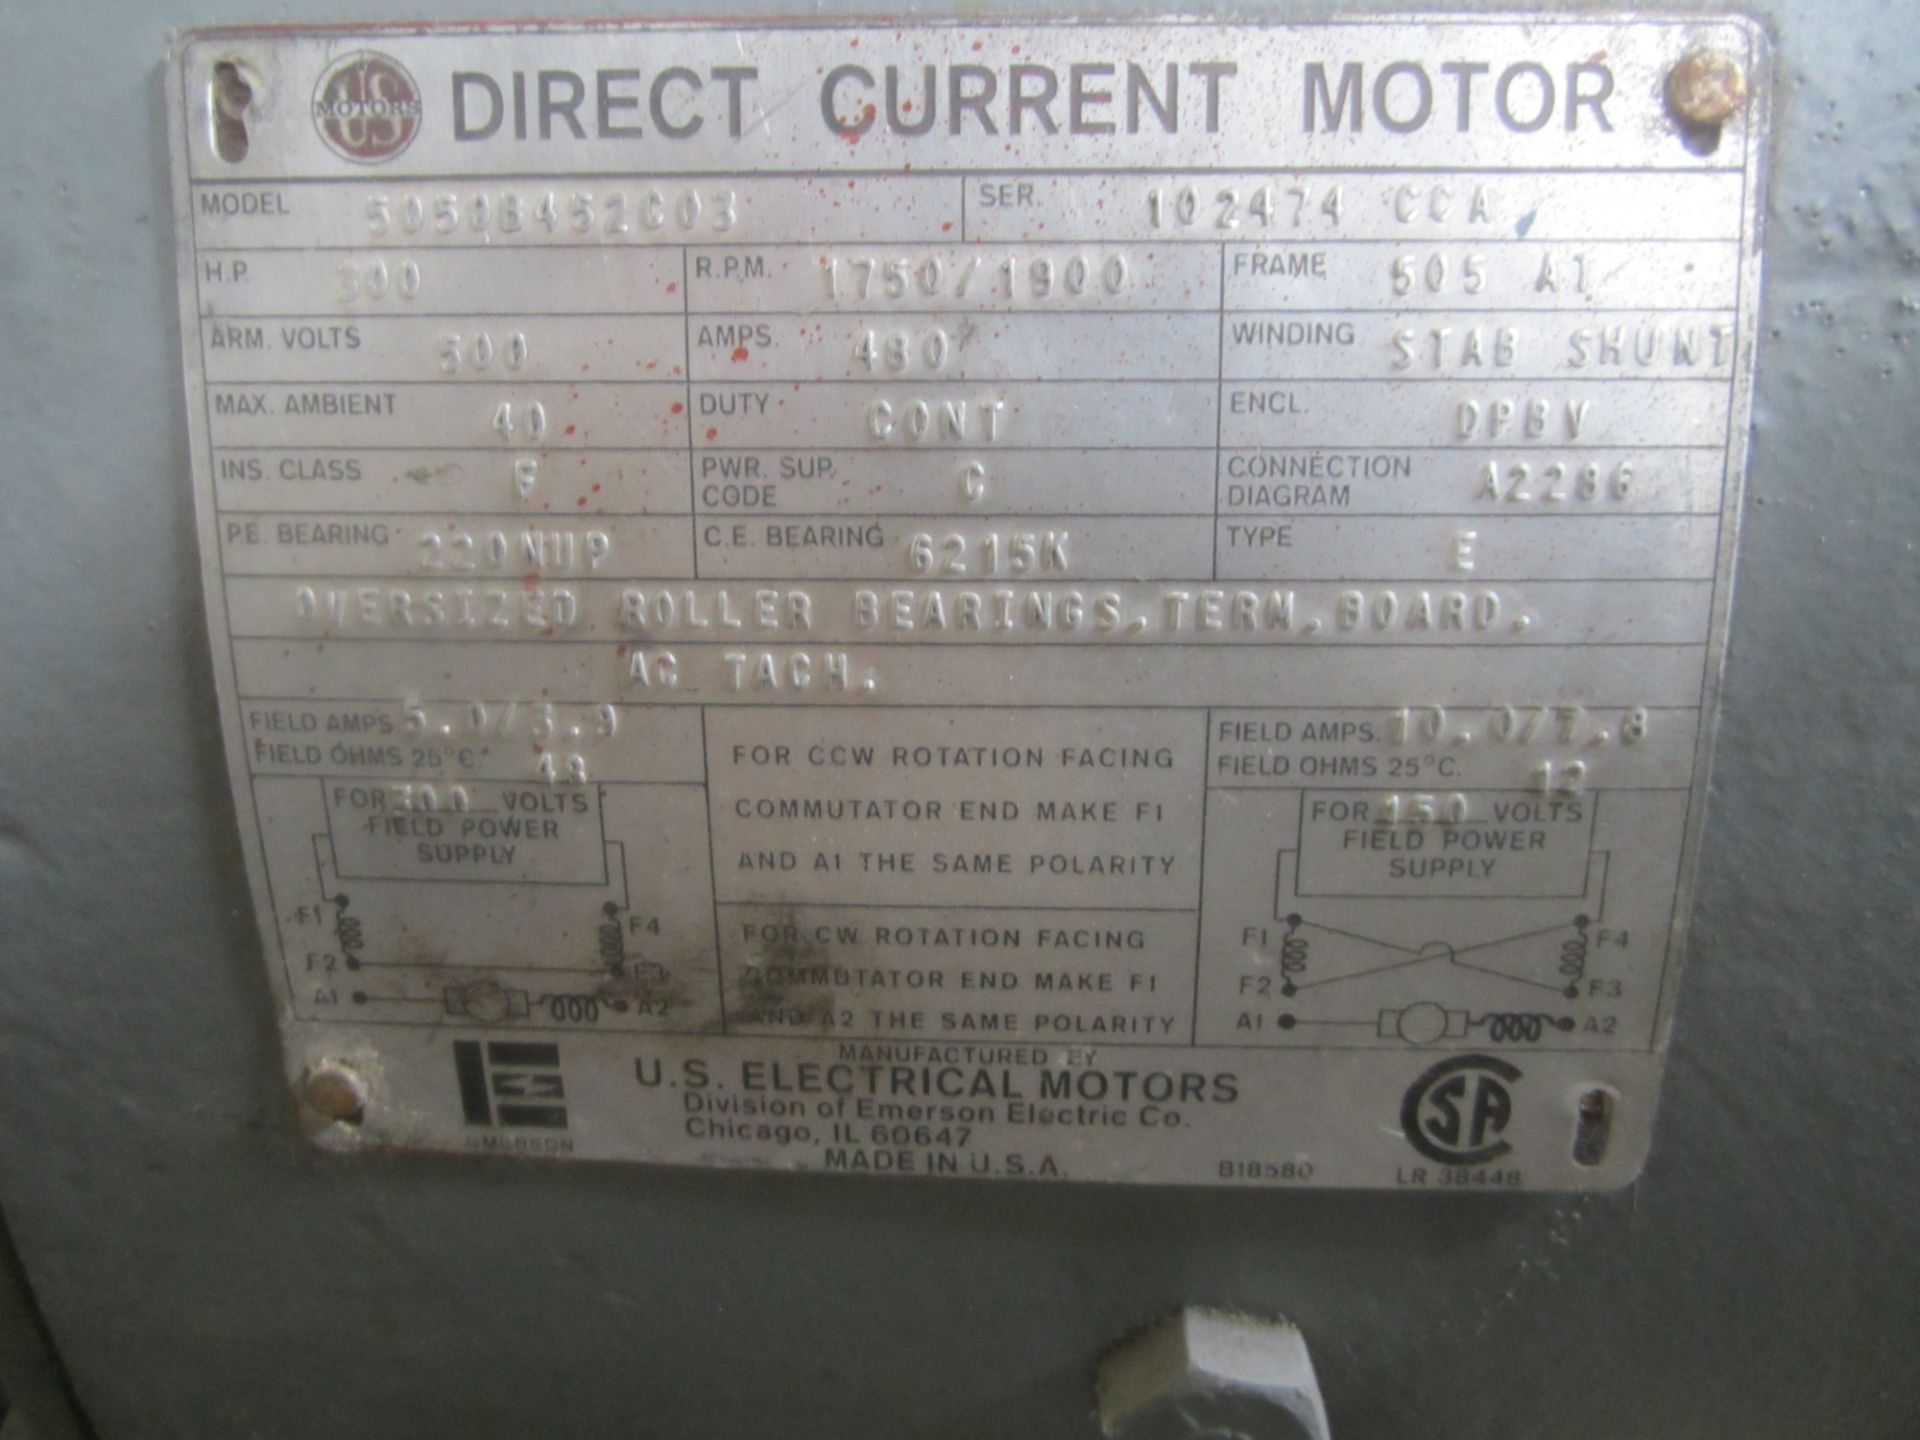 US Electric DC Motor, 300 HP, 1,750 RPM, 5050AT Frame, Note Says Needs Repaired - Image 4 of 4